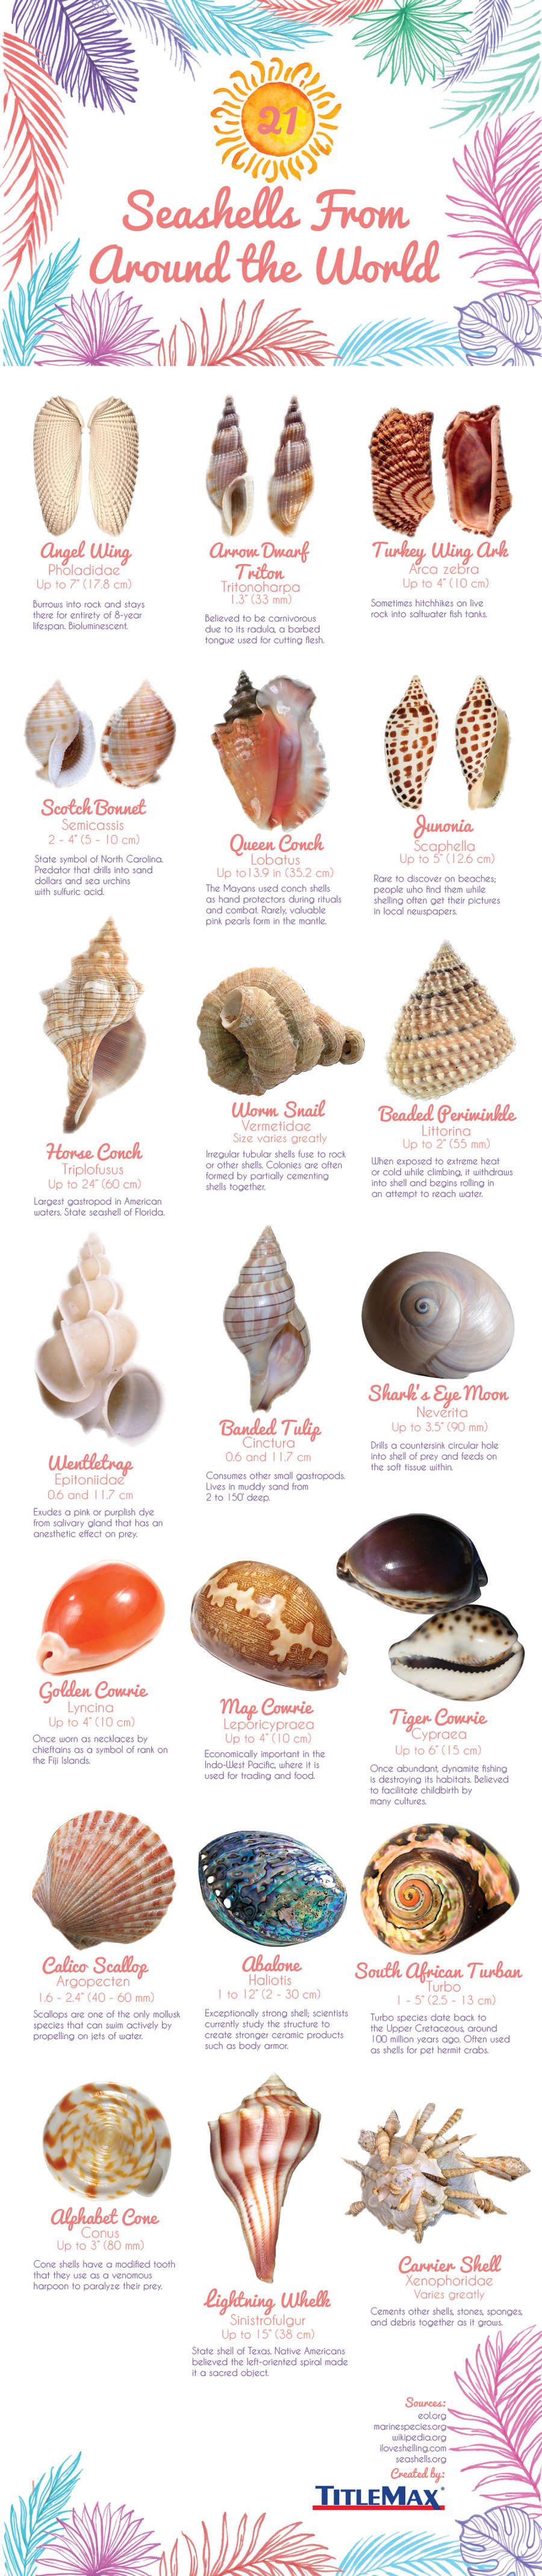 seashells-from-around-the-world-infographic-identification-guide